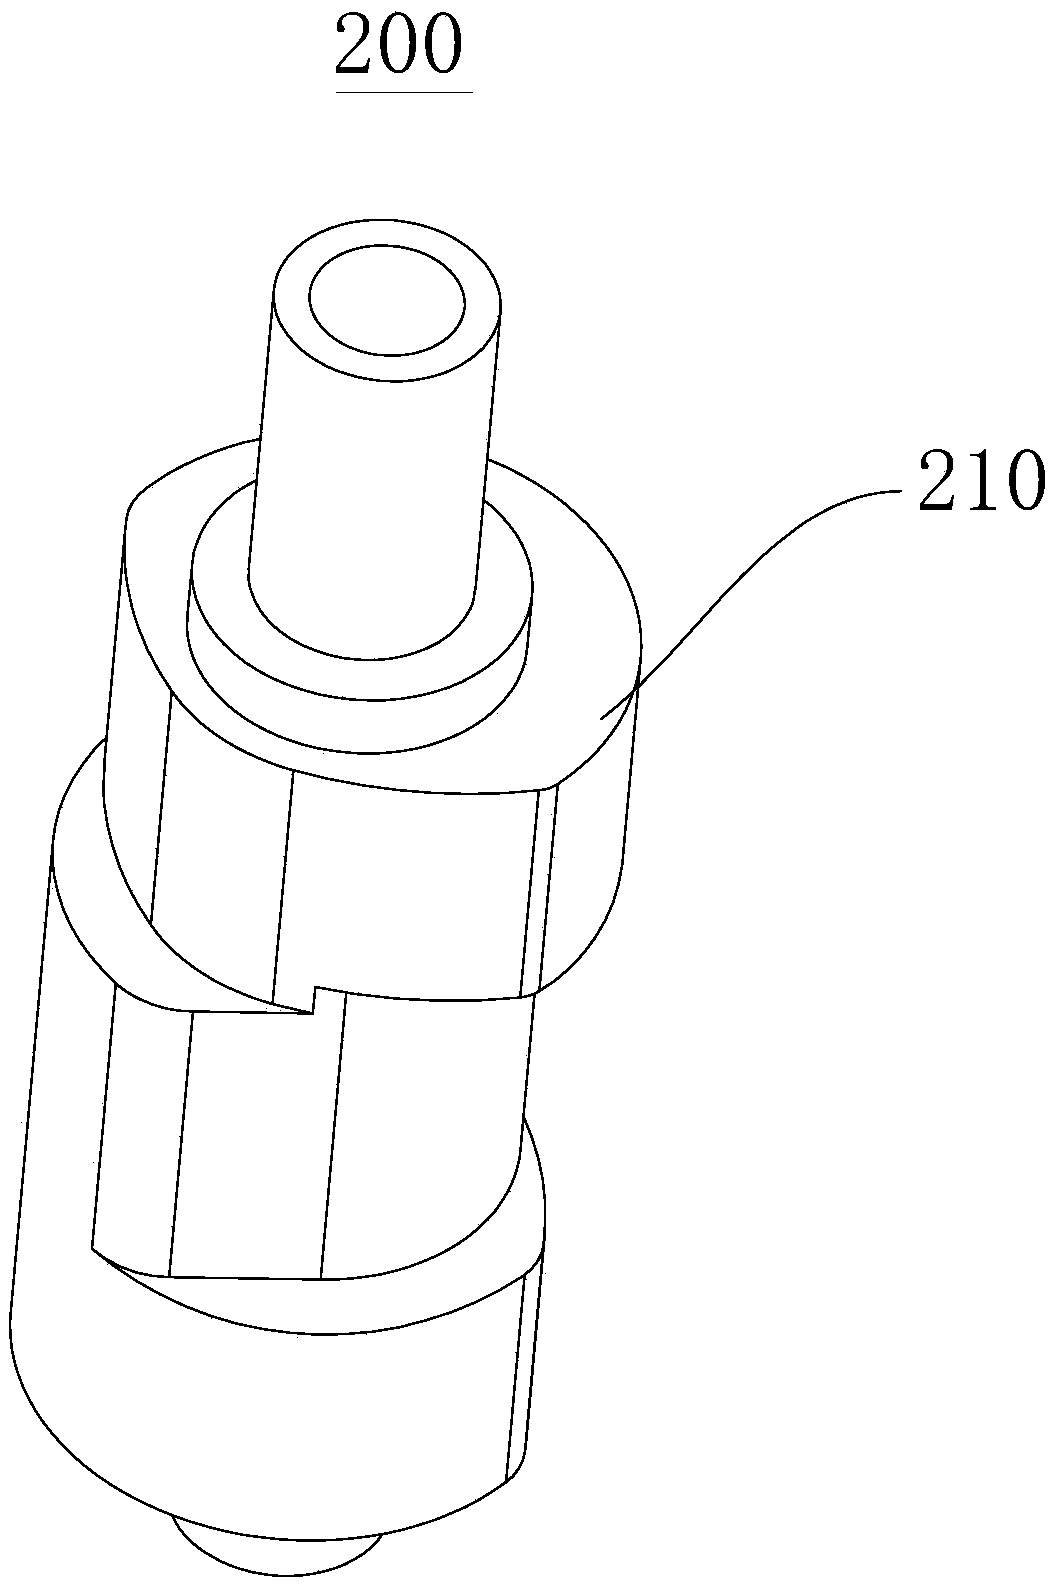 Shut-off valve devices and fluid transfer equipment